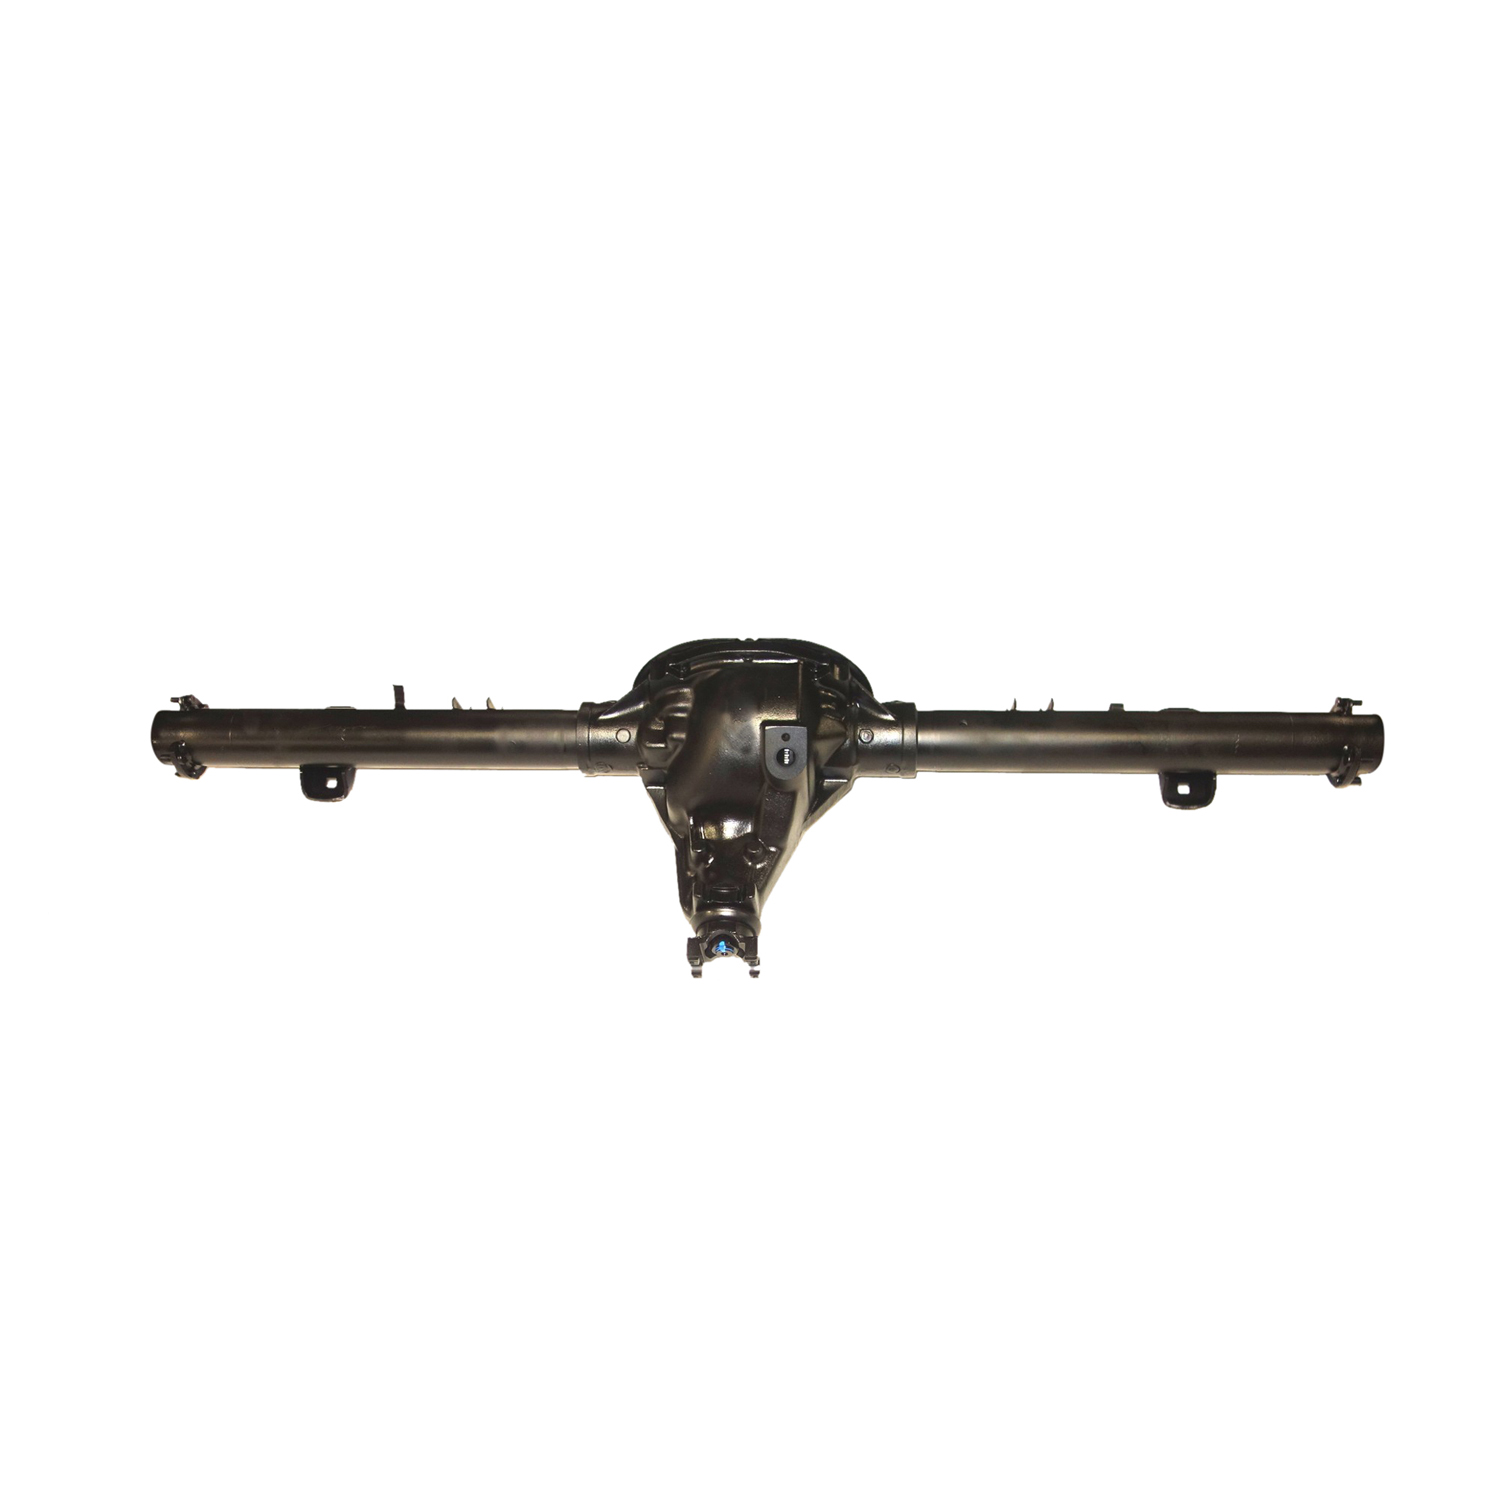 Remanufactured Axle Assy Chy 8.25" 89-93 1/2 Ton, D100, D150, 3.21 , 2wd, Posi LSD w/ ABS